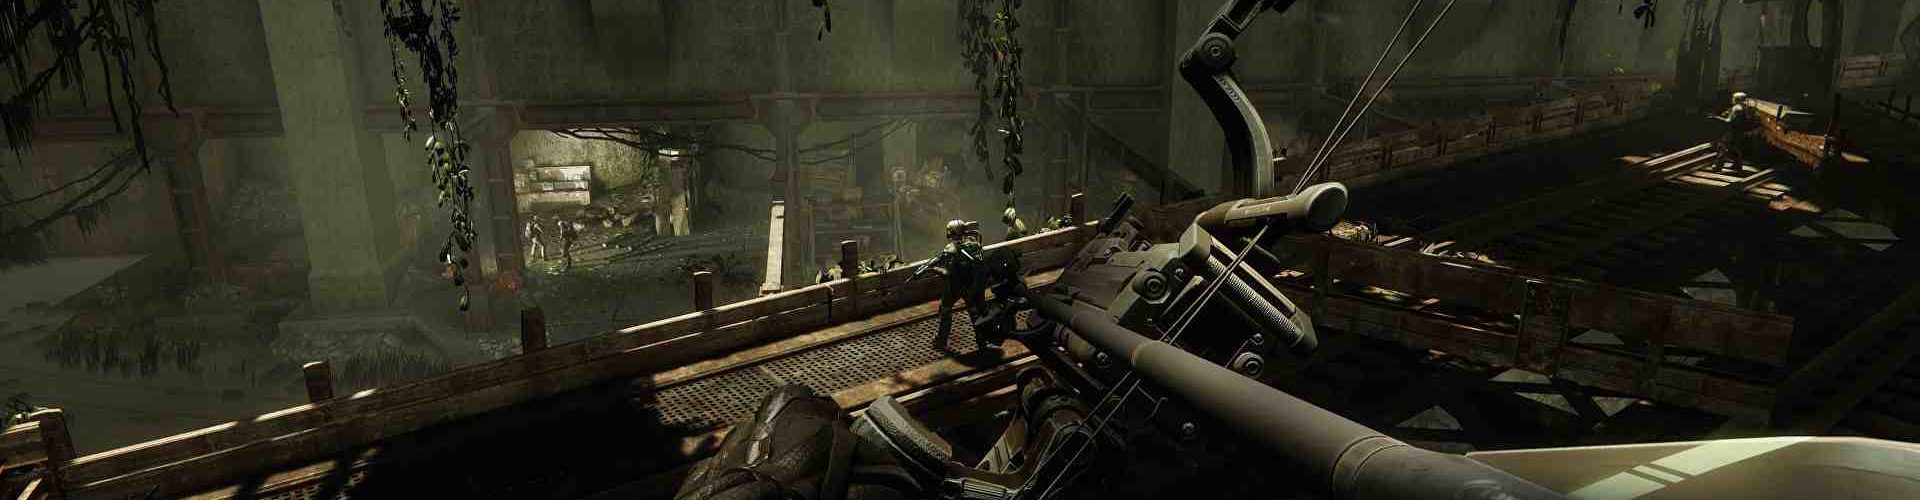 PS2 Shooter Stealth - Sortie sur PS5